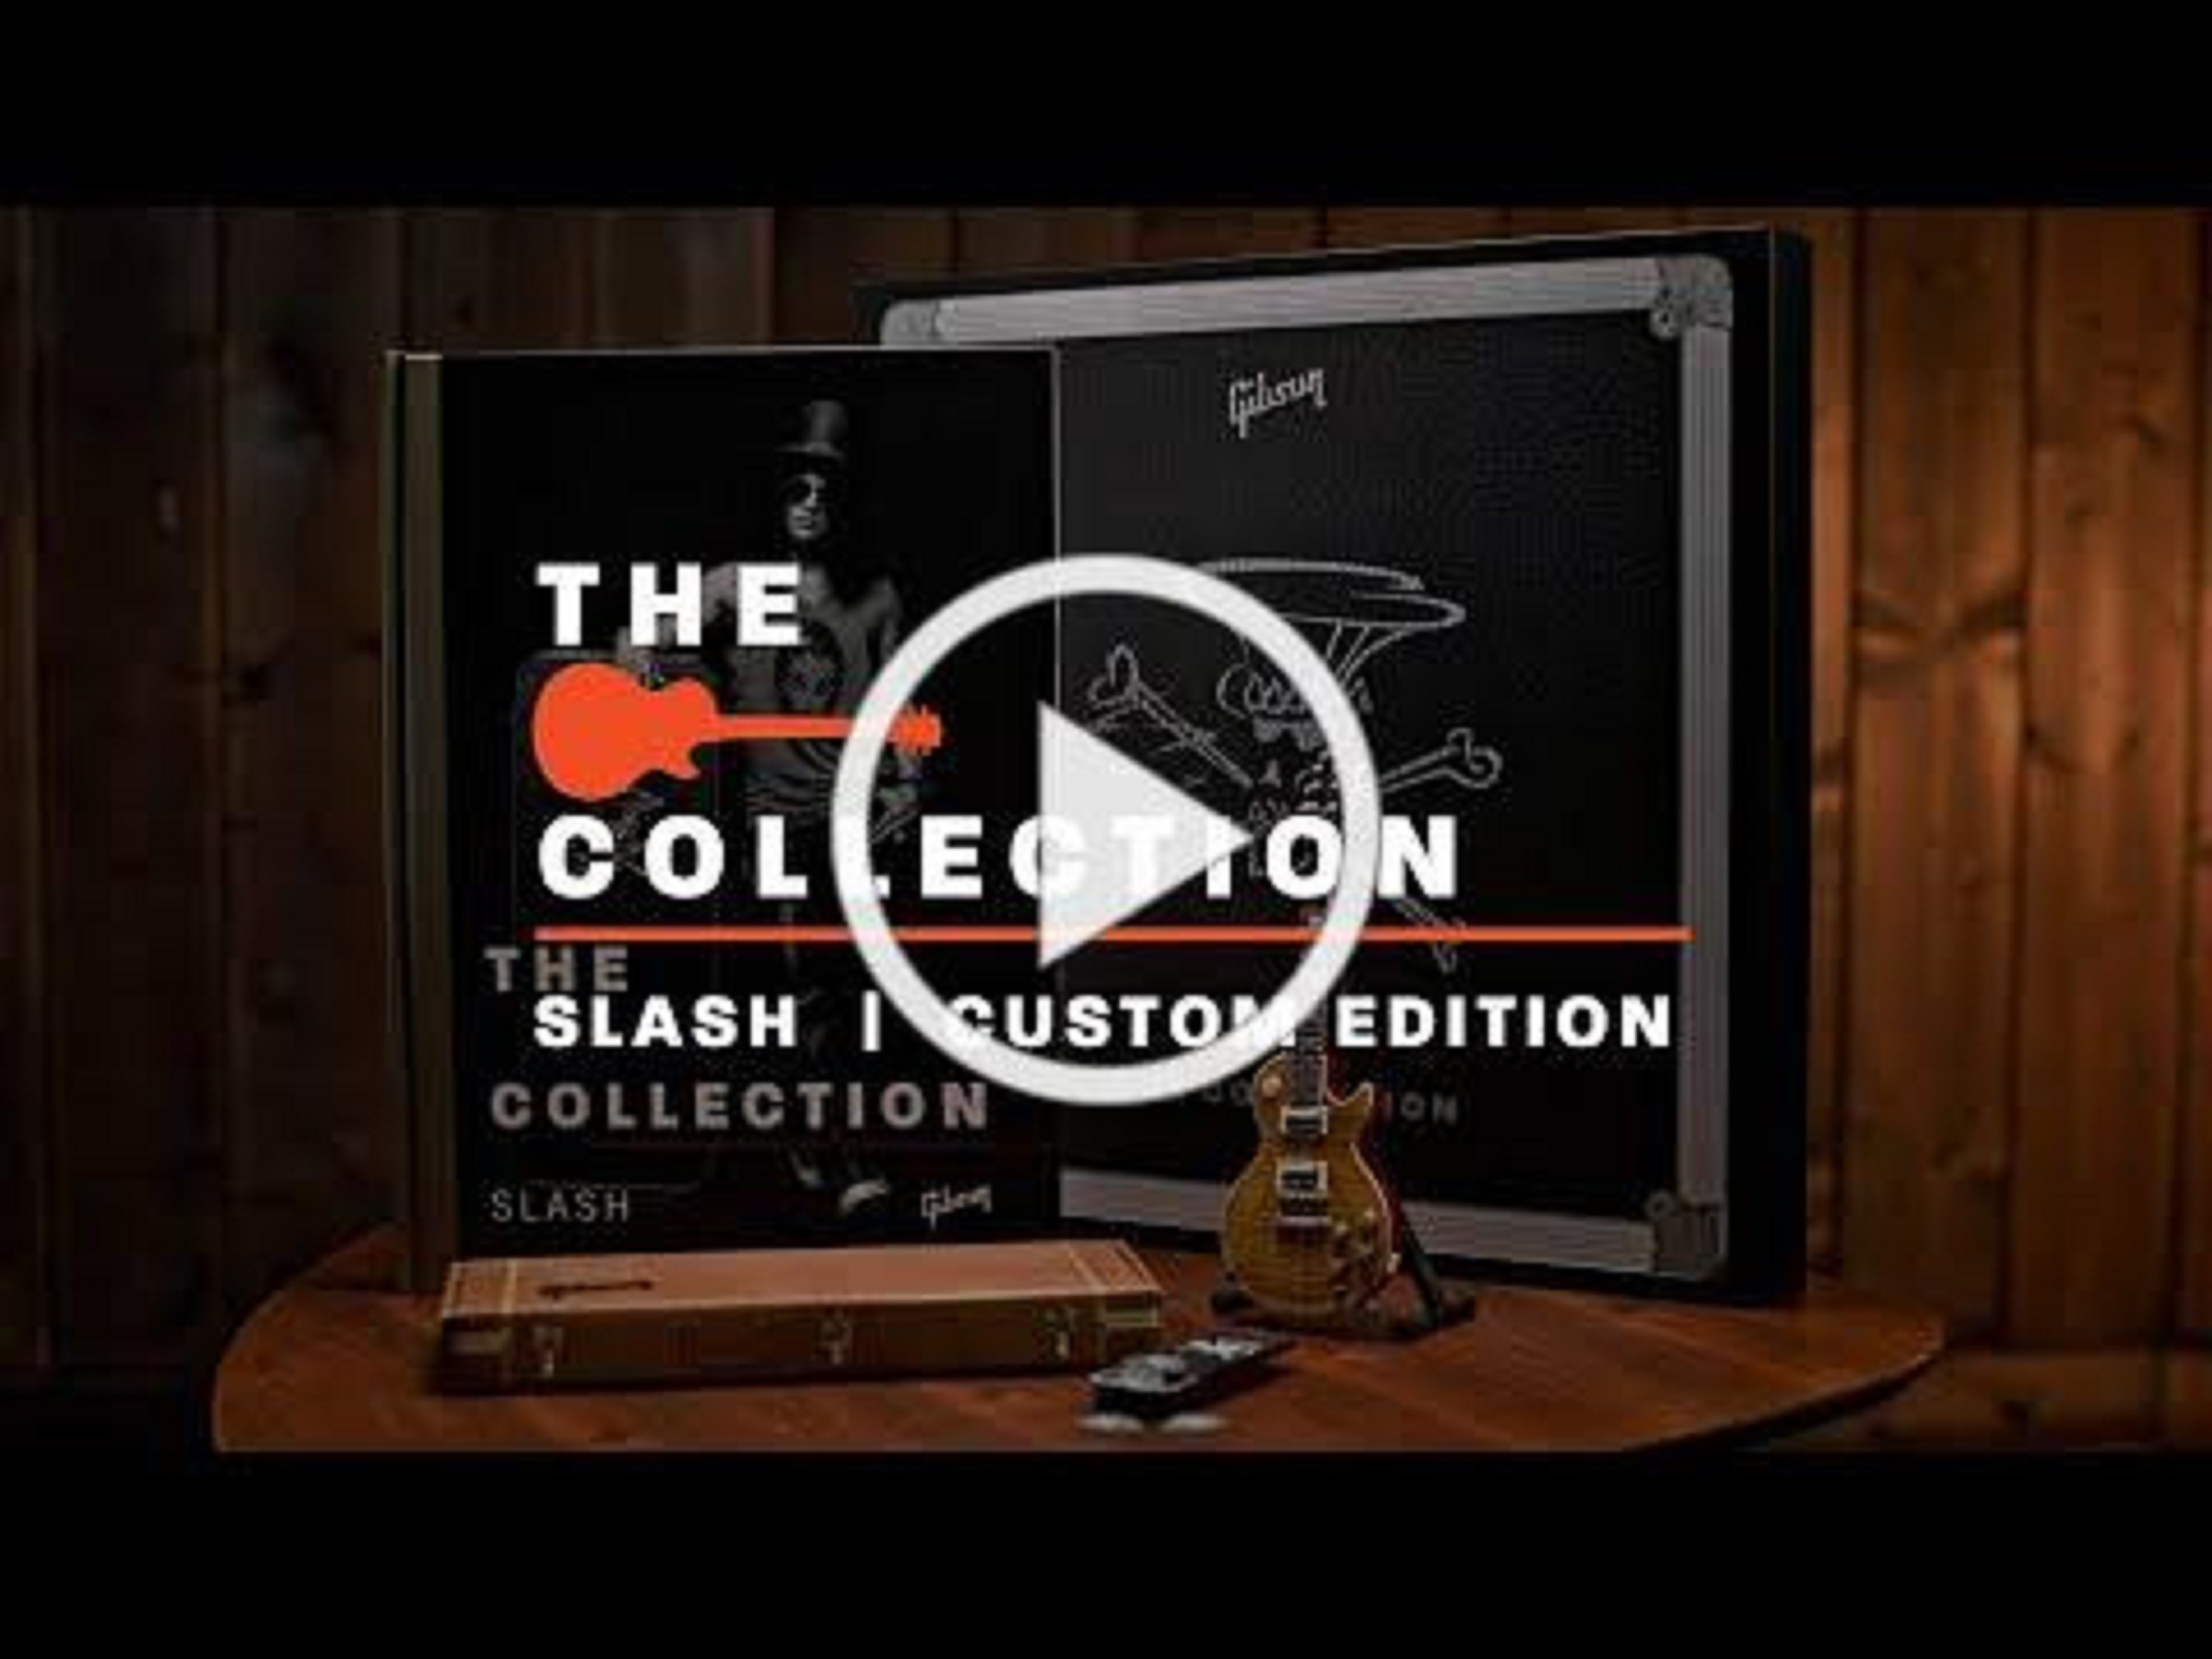 “The Collection: Slash” Premium Custom Edition Book Arrives January 2023, Pre-orders Available Now